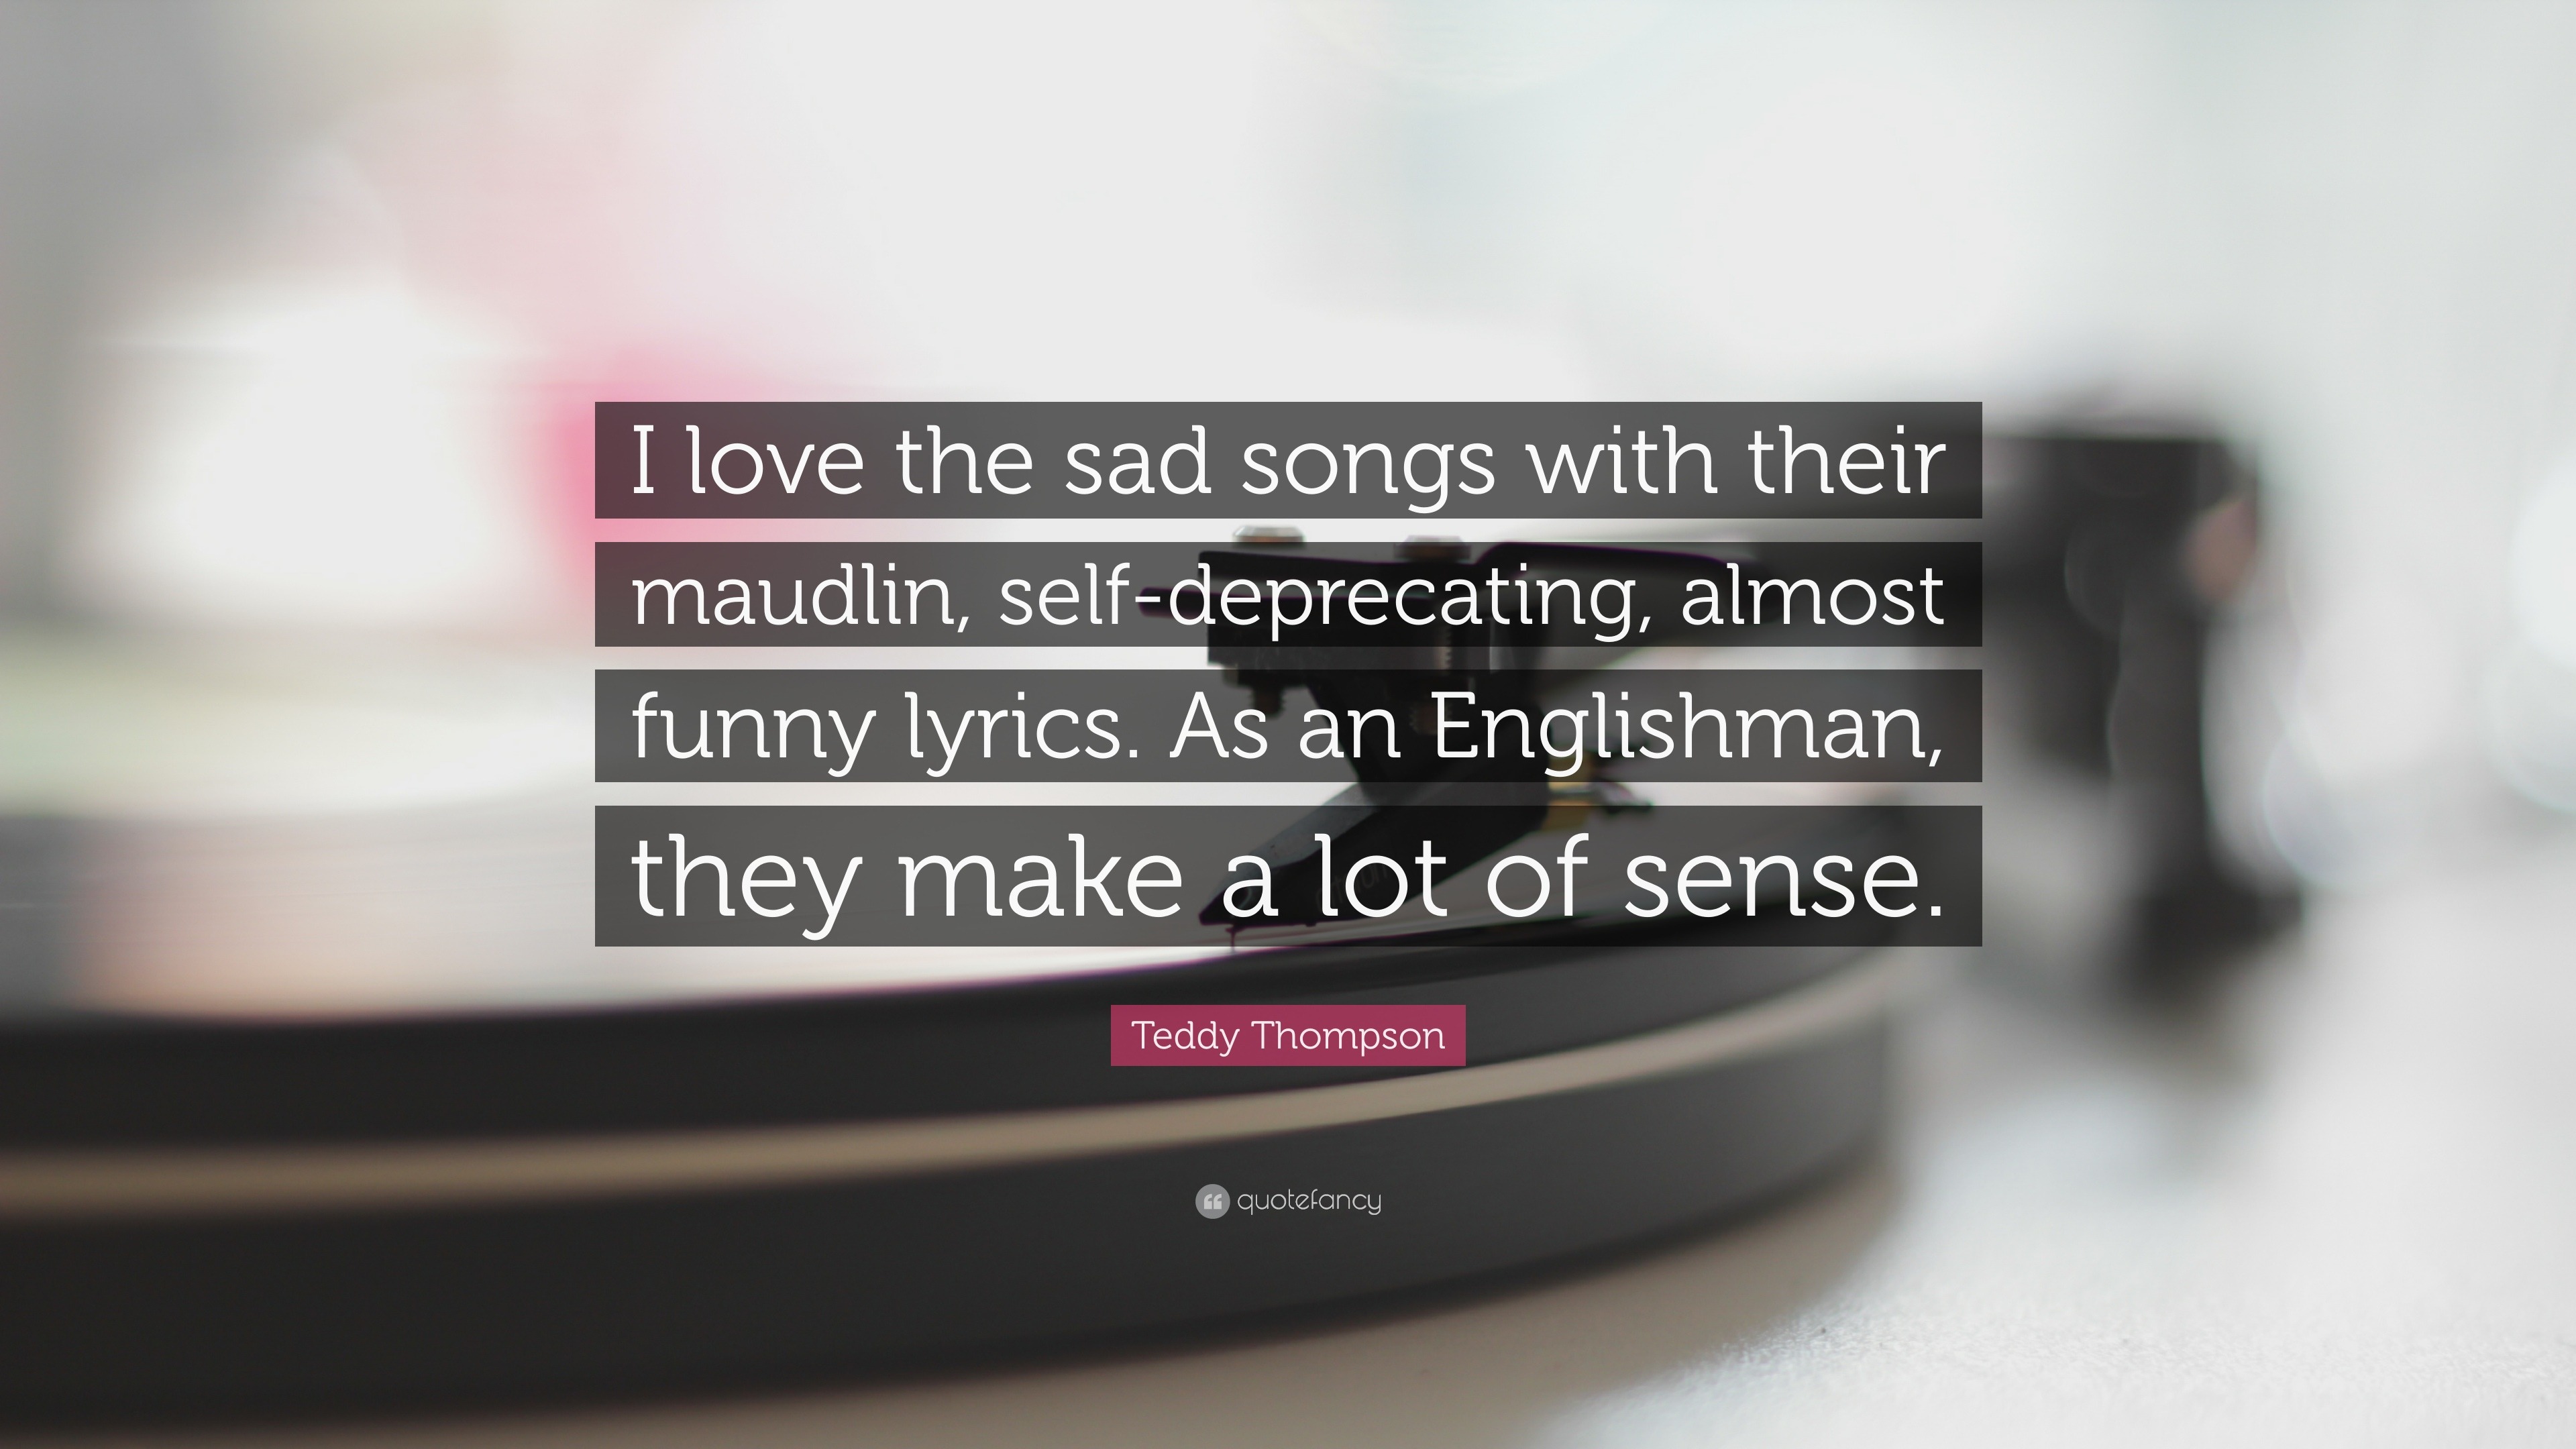 Teddy Thompson Quote: “I love the sad songs with their maudlin, self- deprecating, almost funny lyrics. As an Englishman, they make a lot of  sen...”